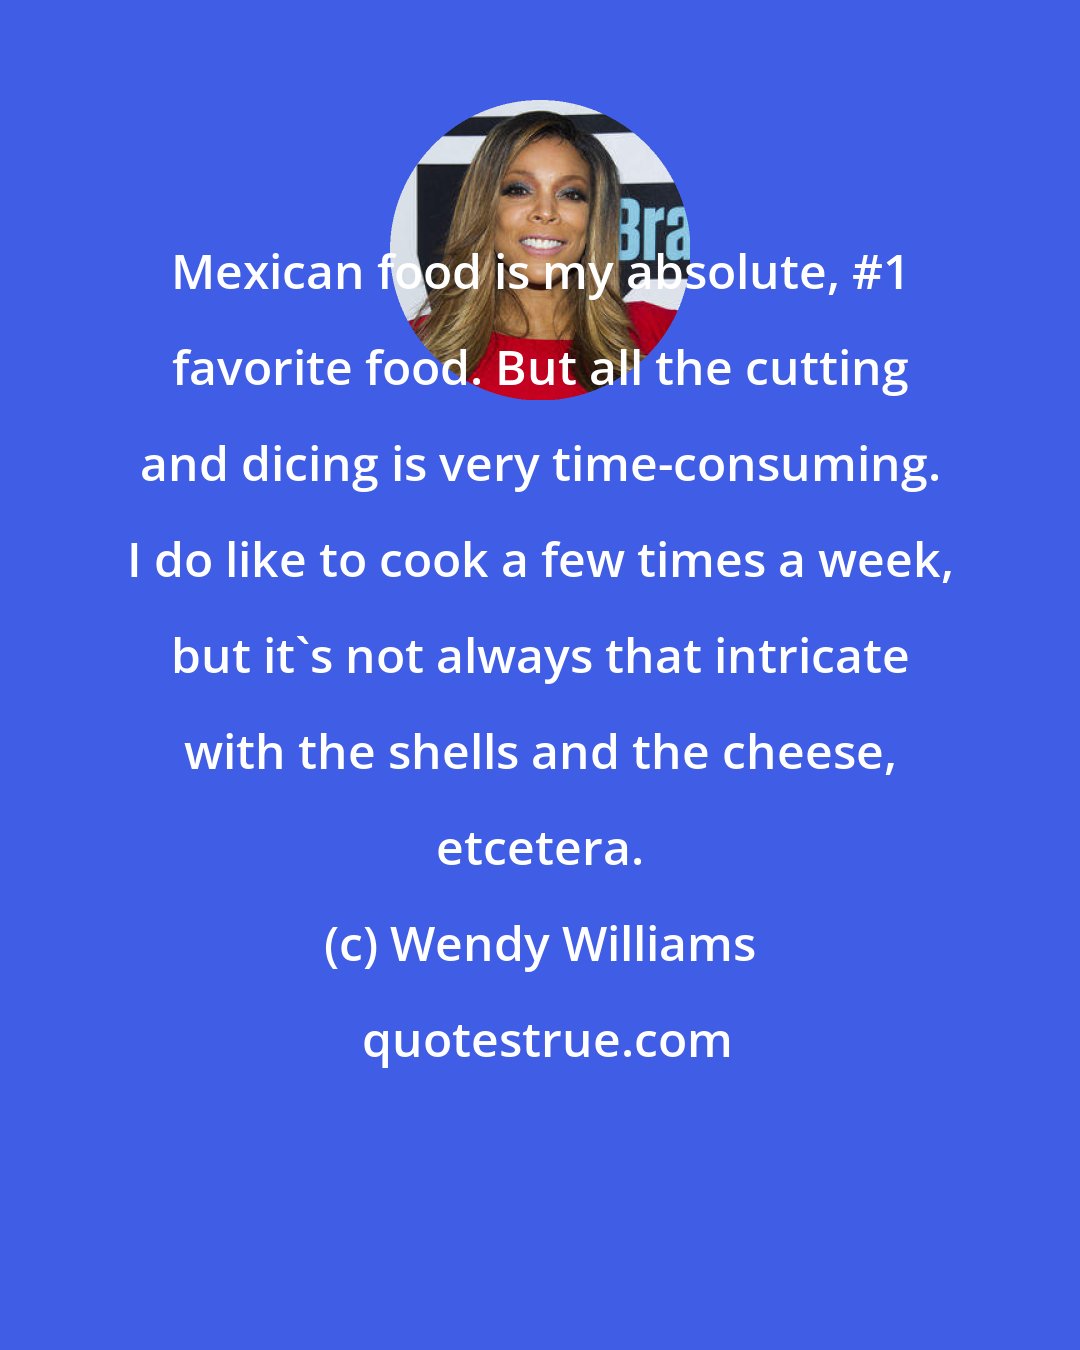 Wendy Williams: Mexican food is my absolute, #1 favorite food. But all the cutting and dicing is very time-consuming. I do like to cook a few times a week, but it's not always that intricate with the shells and the cheese, etcetera.